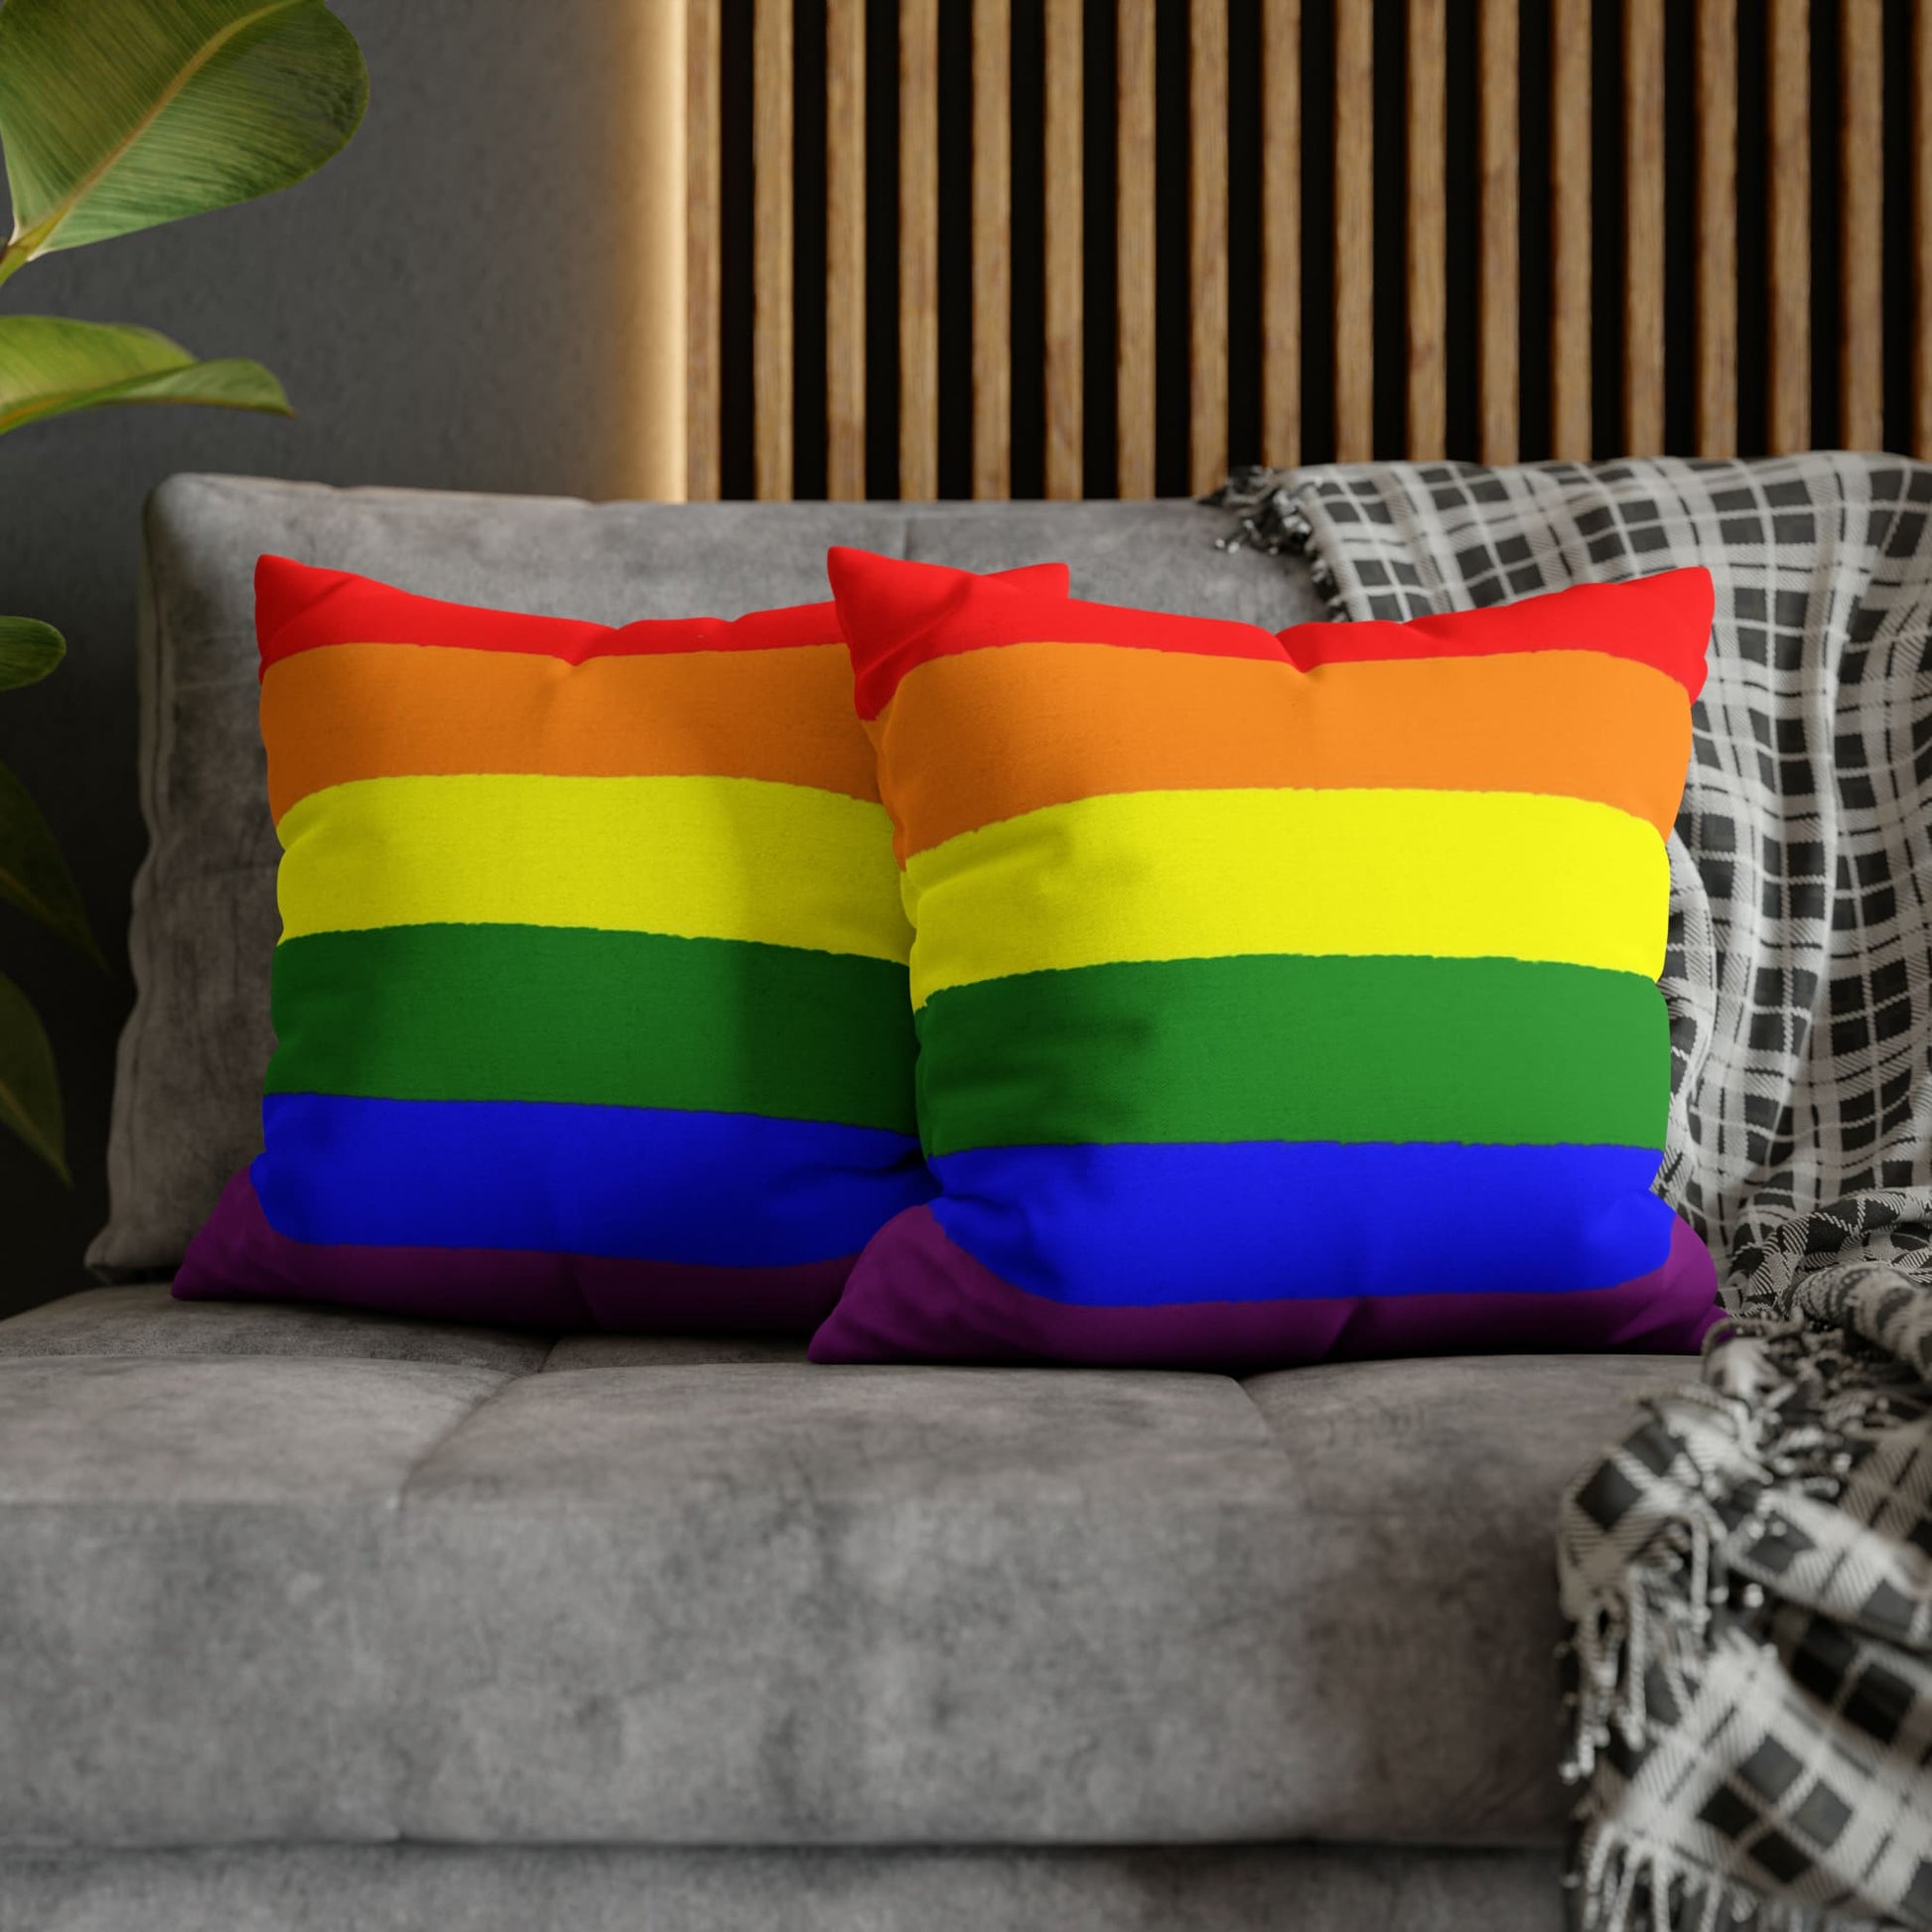 2 LGBTQ pride pillows on couch